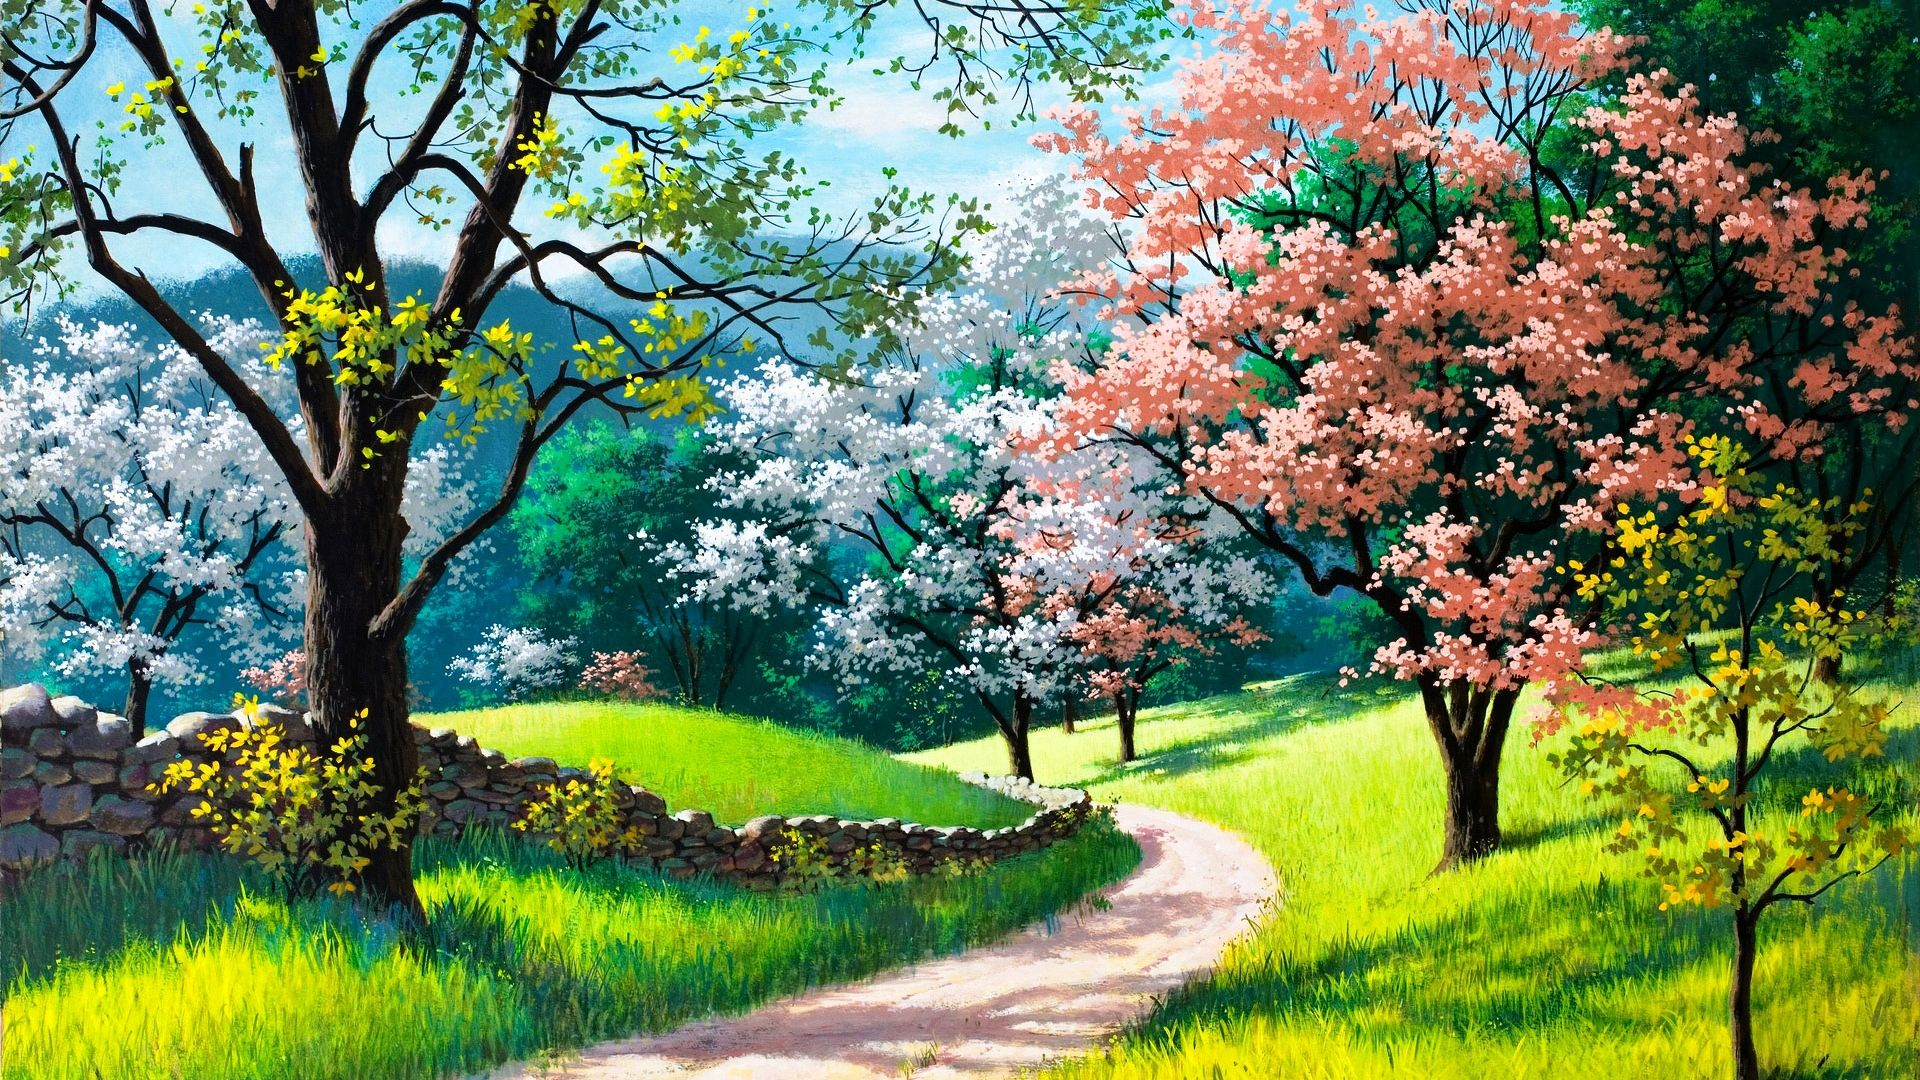 1920x1080 Desktop Wallpaper Spring Nature Painting Trees Grass Road, Hd Image, Picture, Background, 4ispou